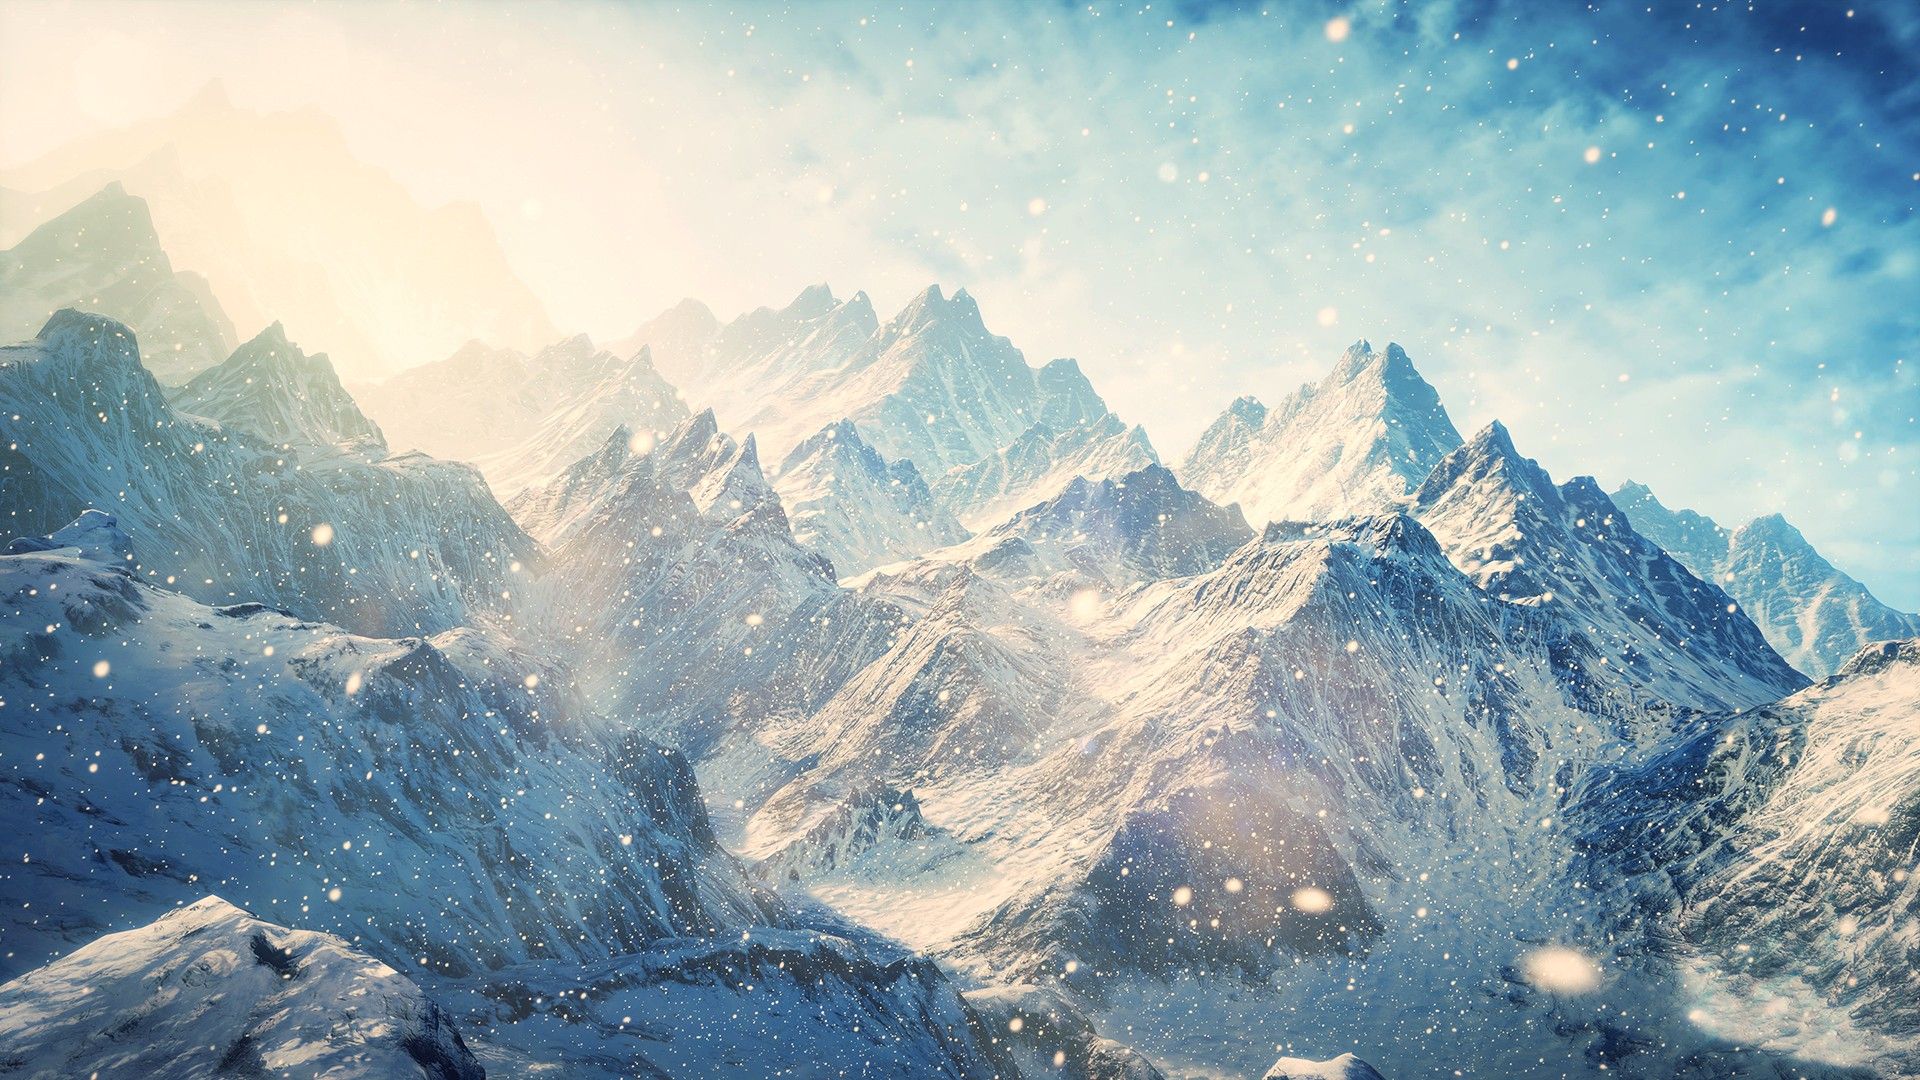 Winter Mountains With Snow HD Wallpaper FullHDWpp   Full HD